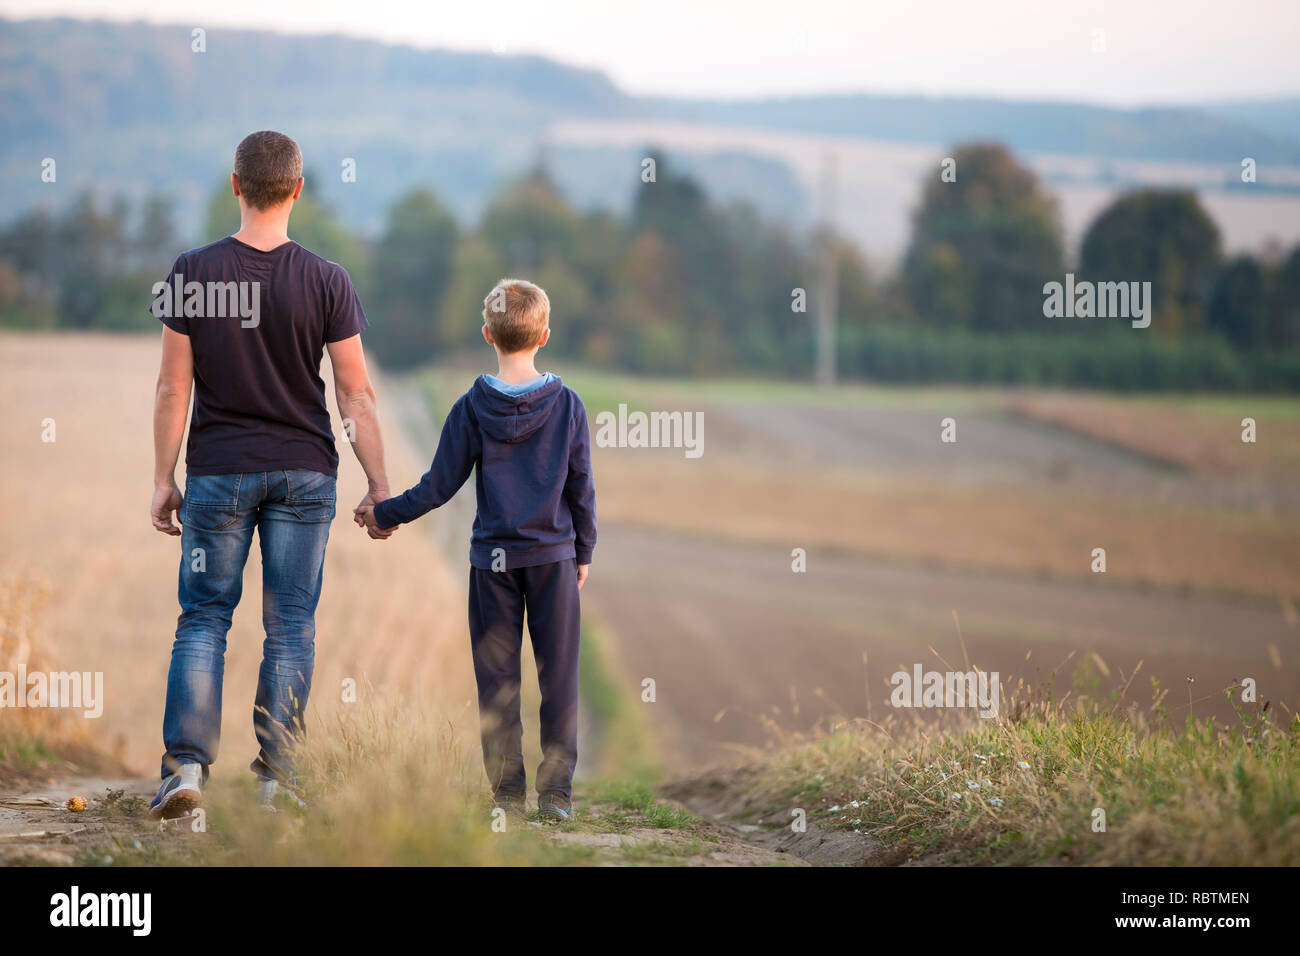 Back view of young father and son walking together holding hands by grassy field on blurred foggy green trees and blue sky background. Active lifestyl Stock Photo